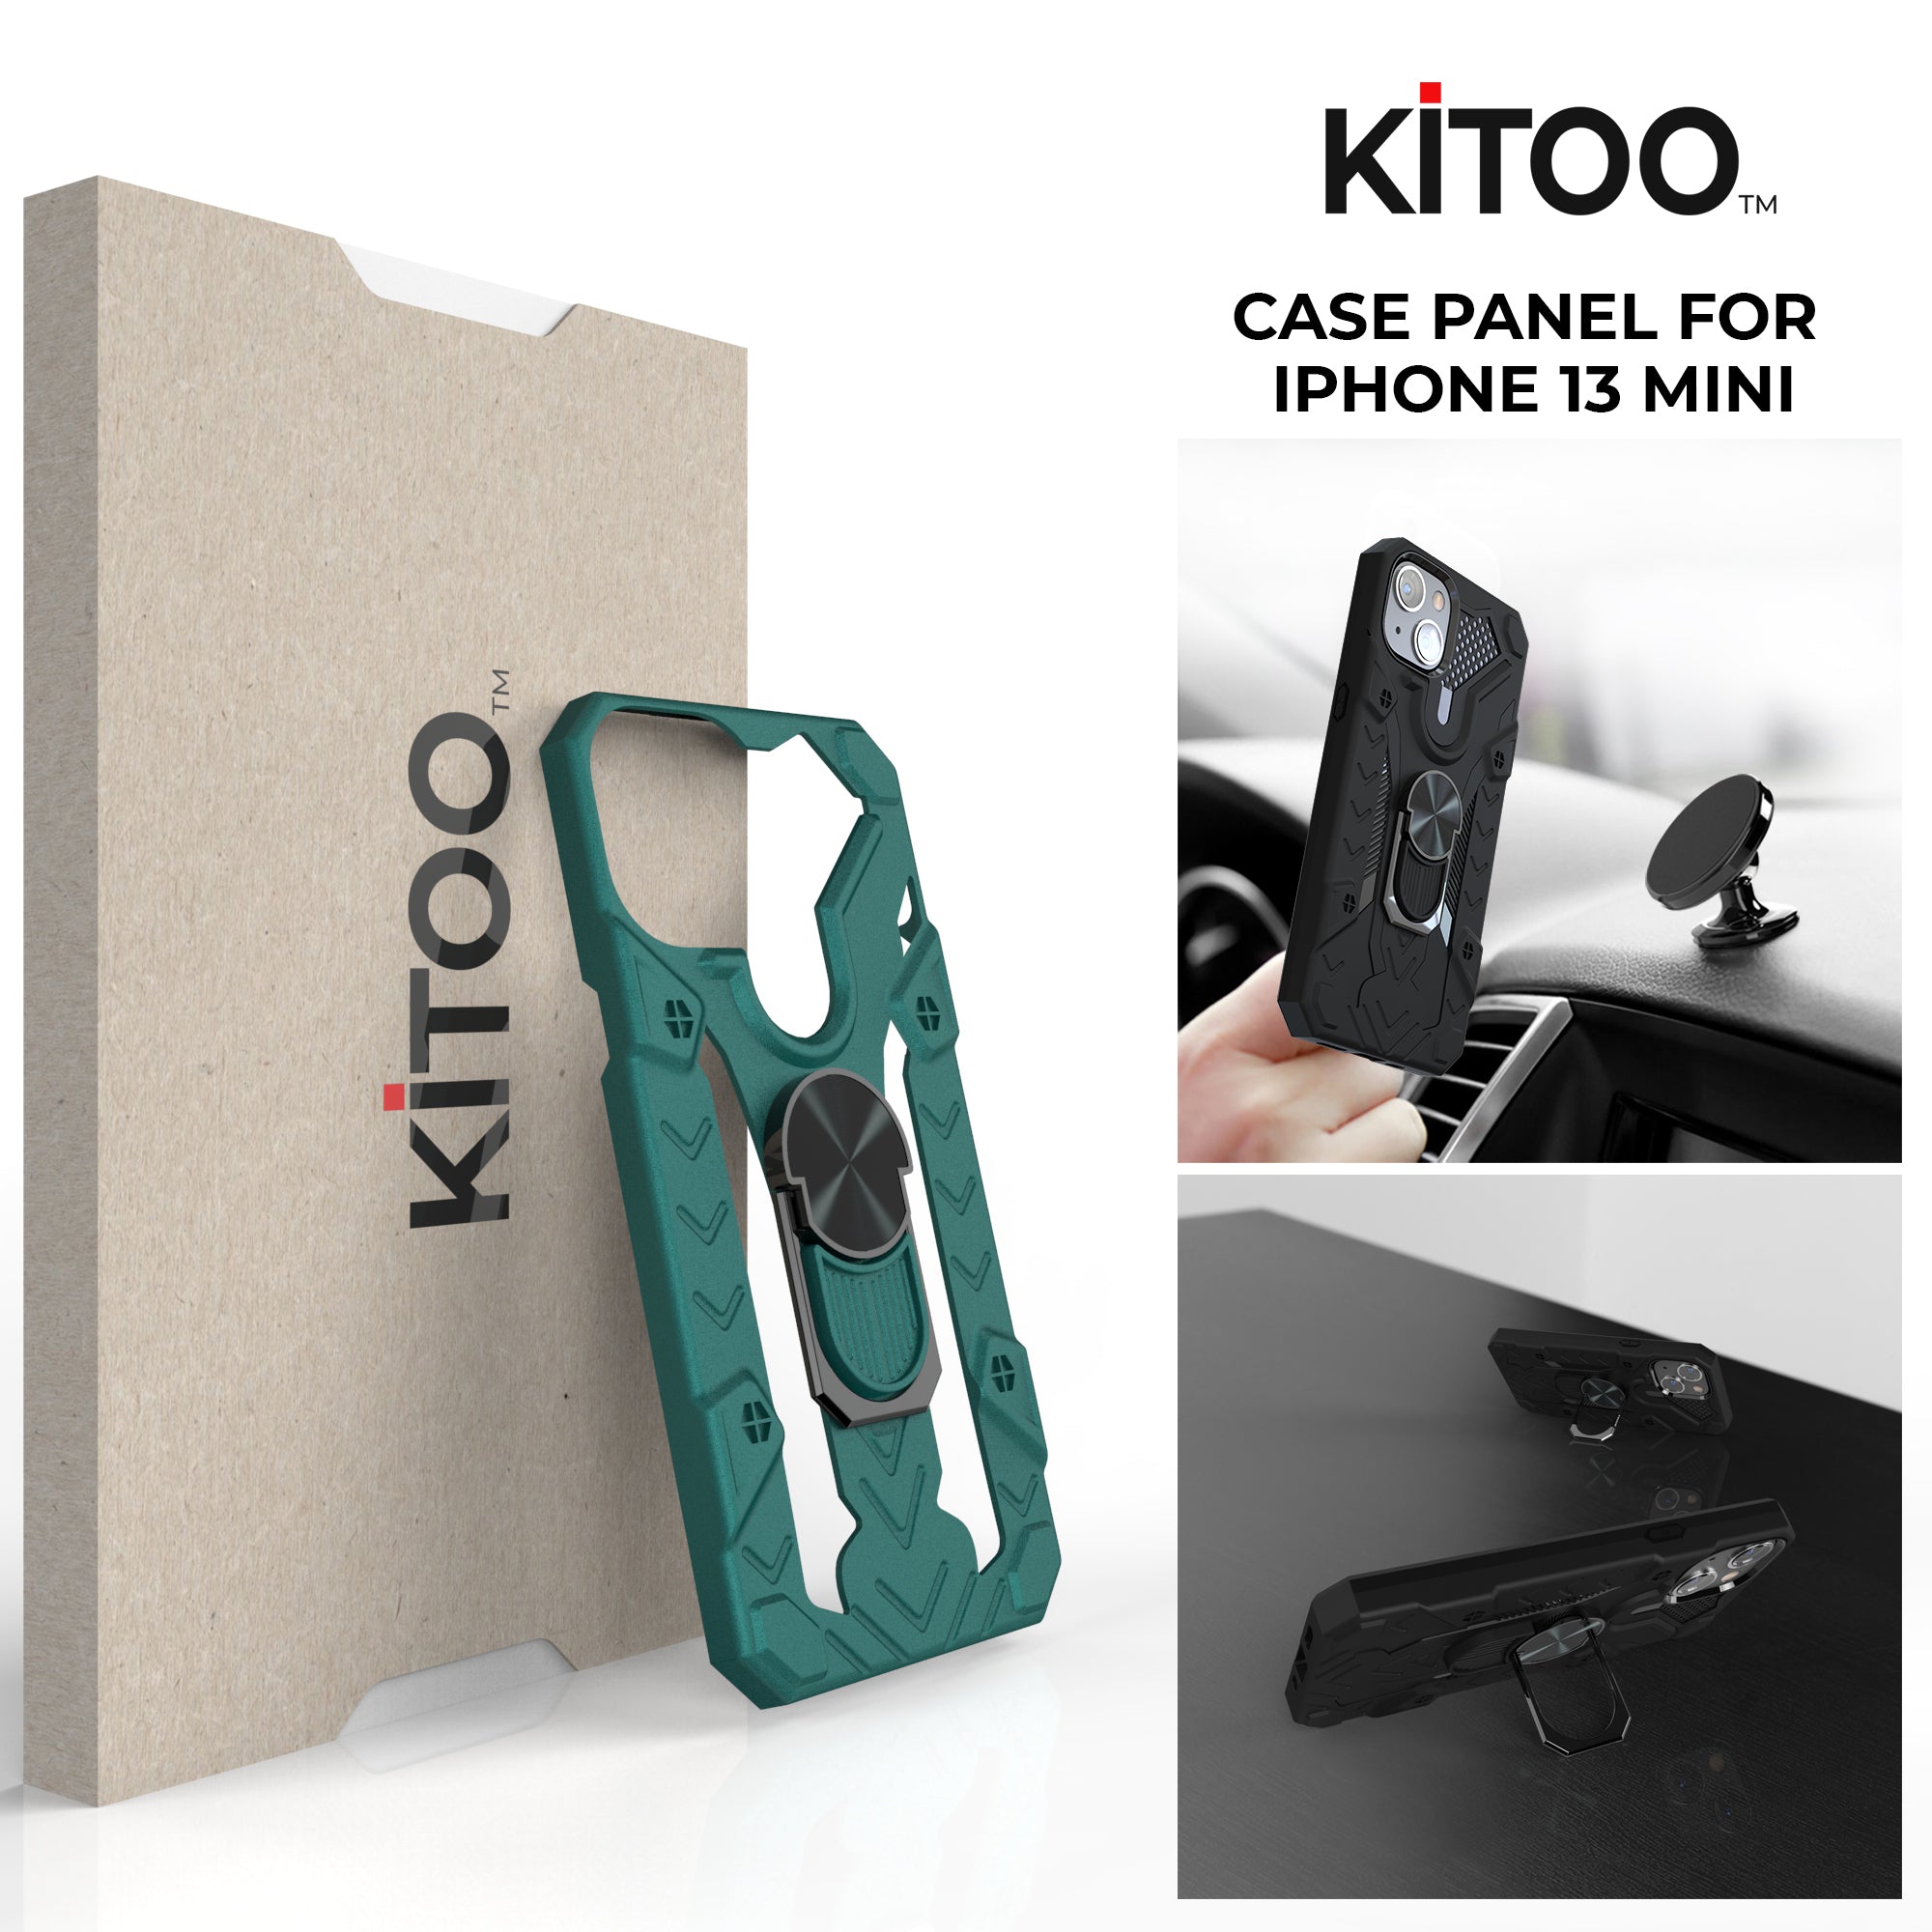 Kitoo Ring Panel Designed for iPhone 13 Mini case (Spare Part only) - Turquoise